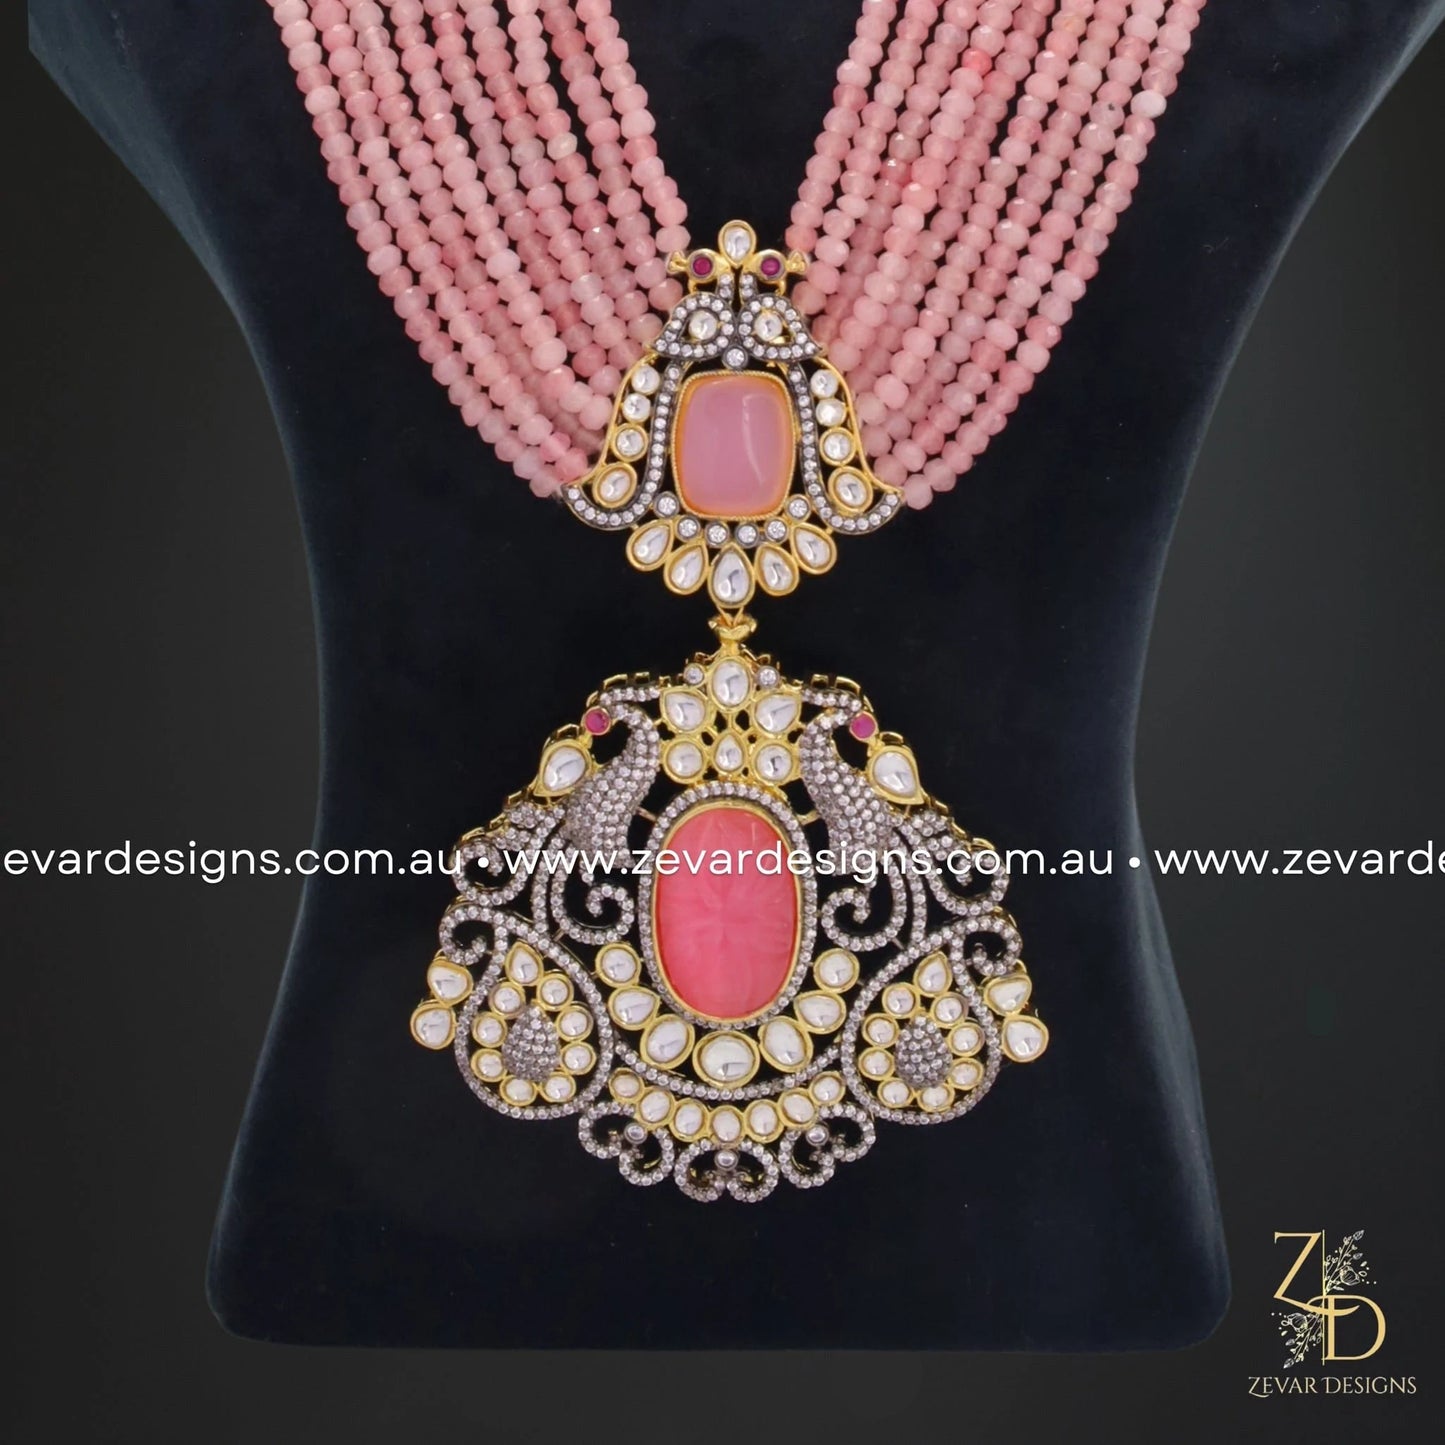 Zevar Designs Long Necklace Sets Victorian Style Long Necklace in Dual Finish  - Pink